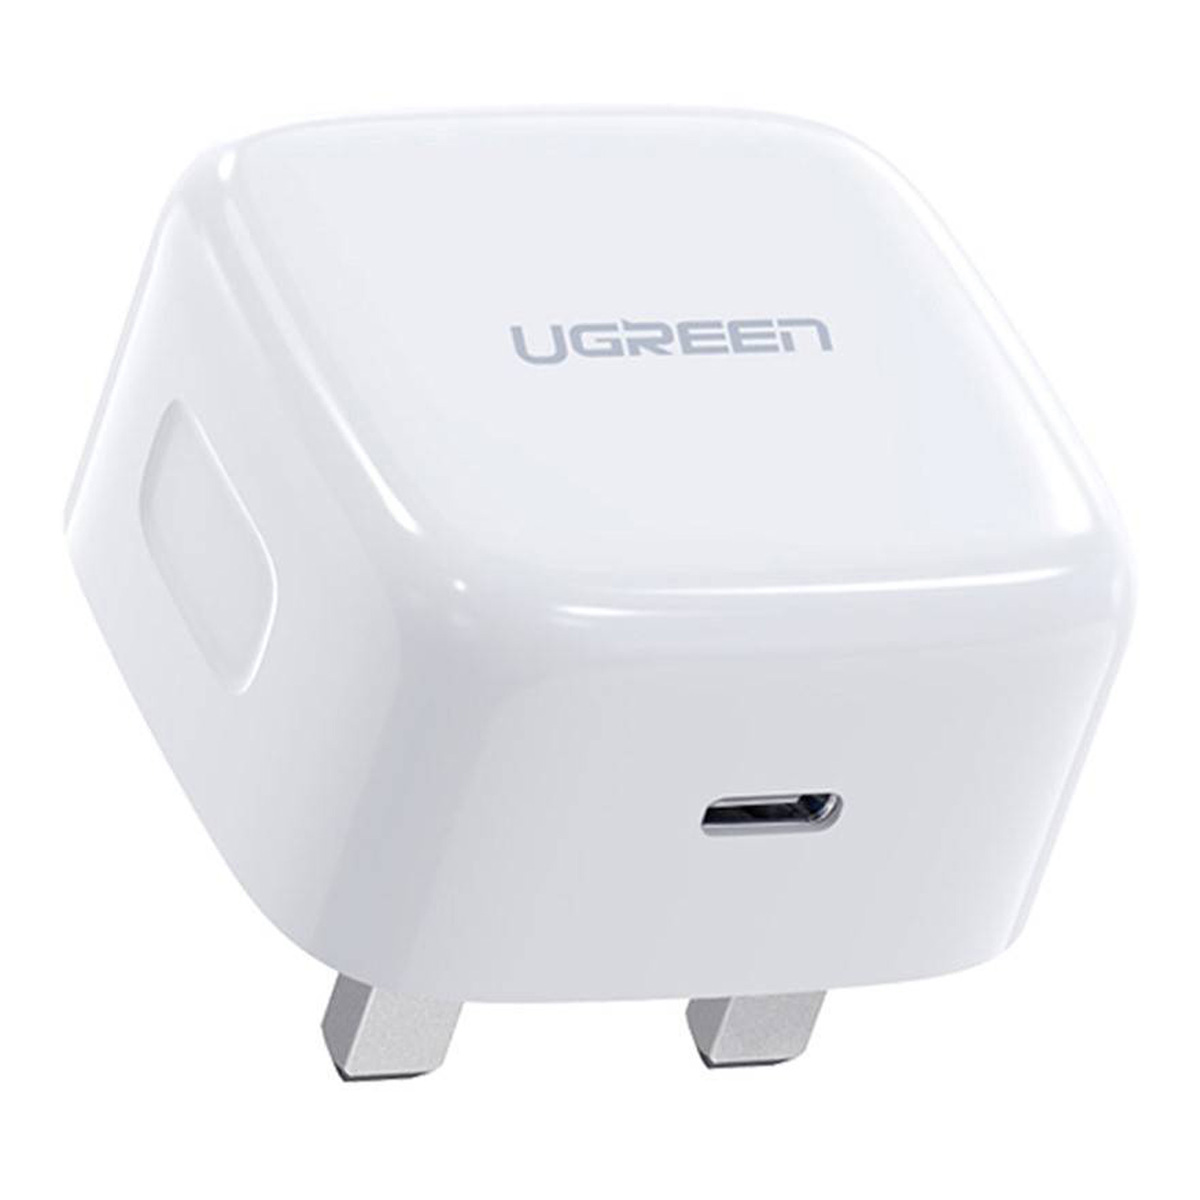 Ugreen PD USB-C UK Fast Charger with C to Lightning MFI Cable, 20 W, 1 m, White, CD137-70297B